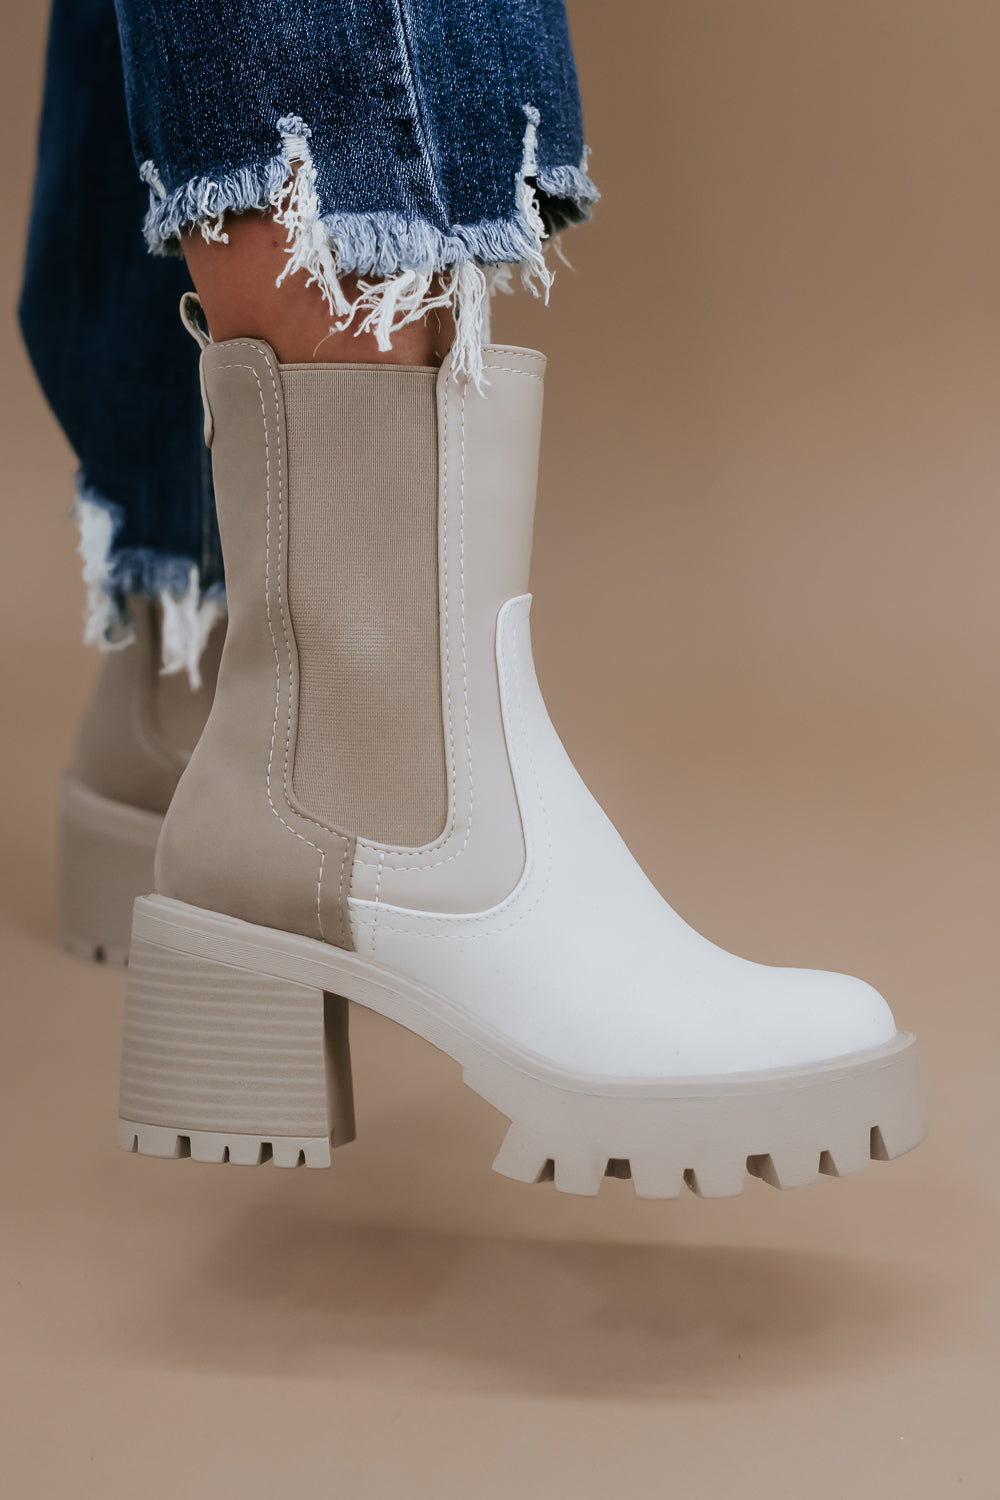 Platform Boots, Neutral boots, Winter style boots